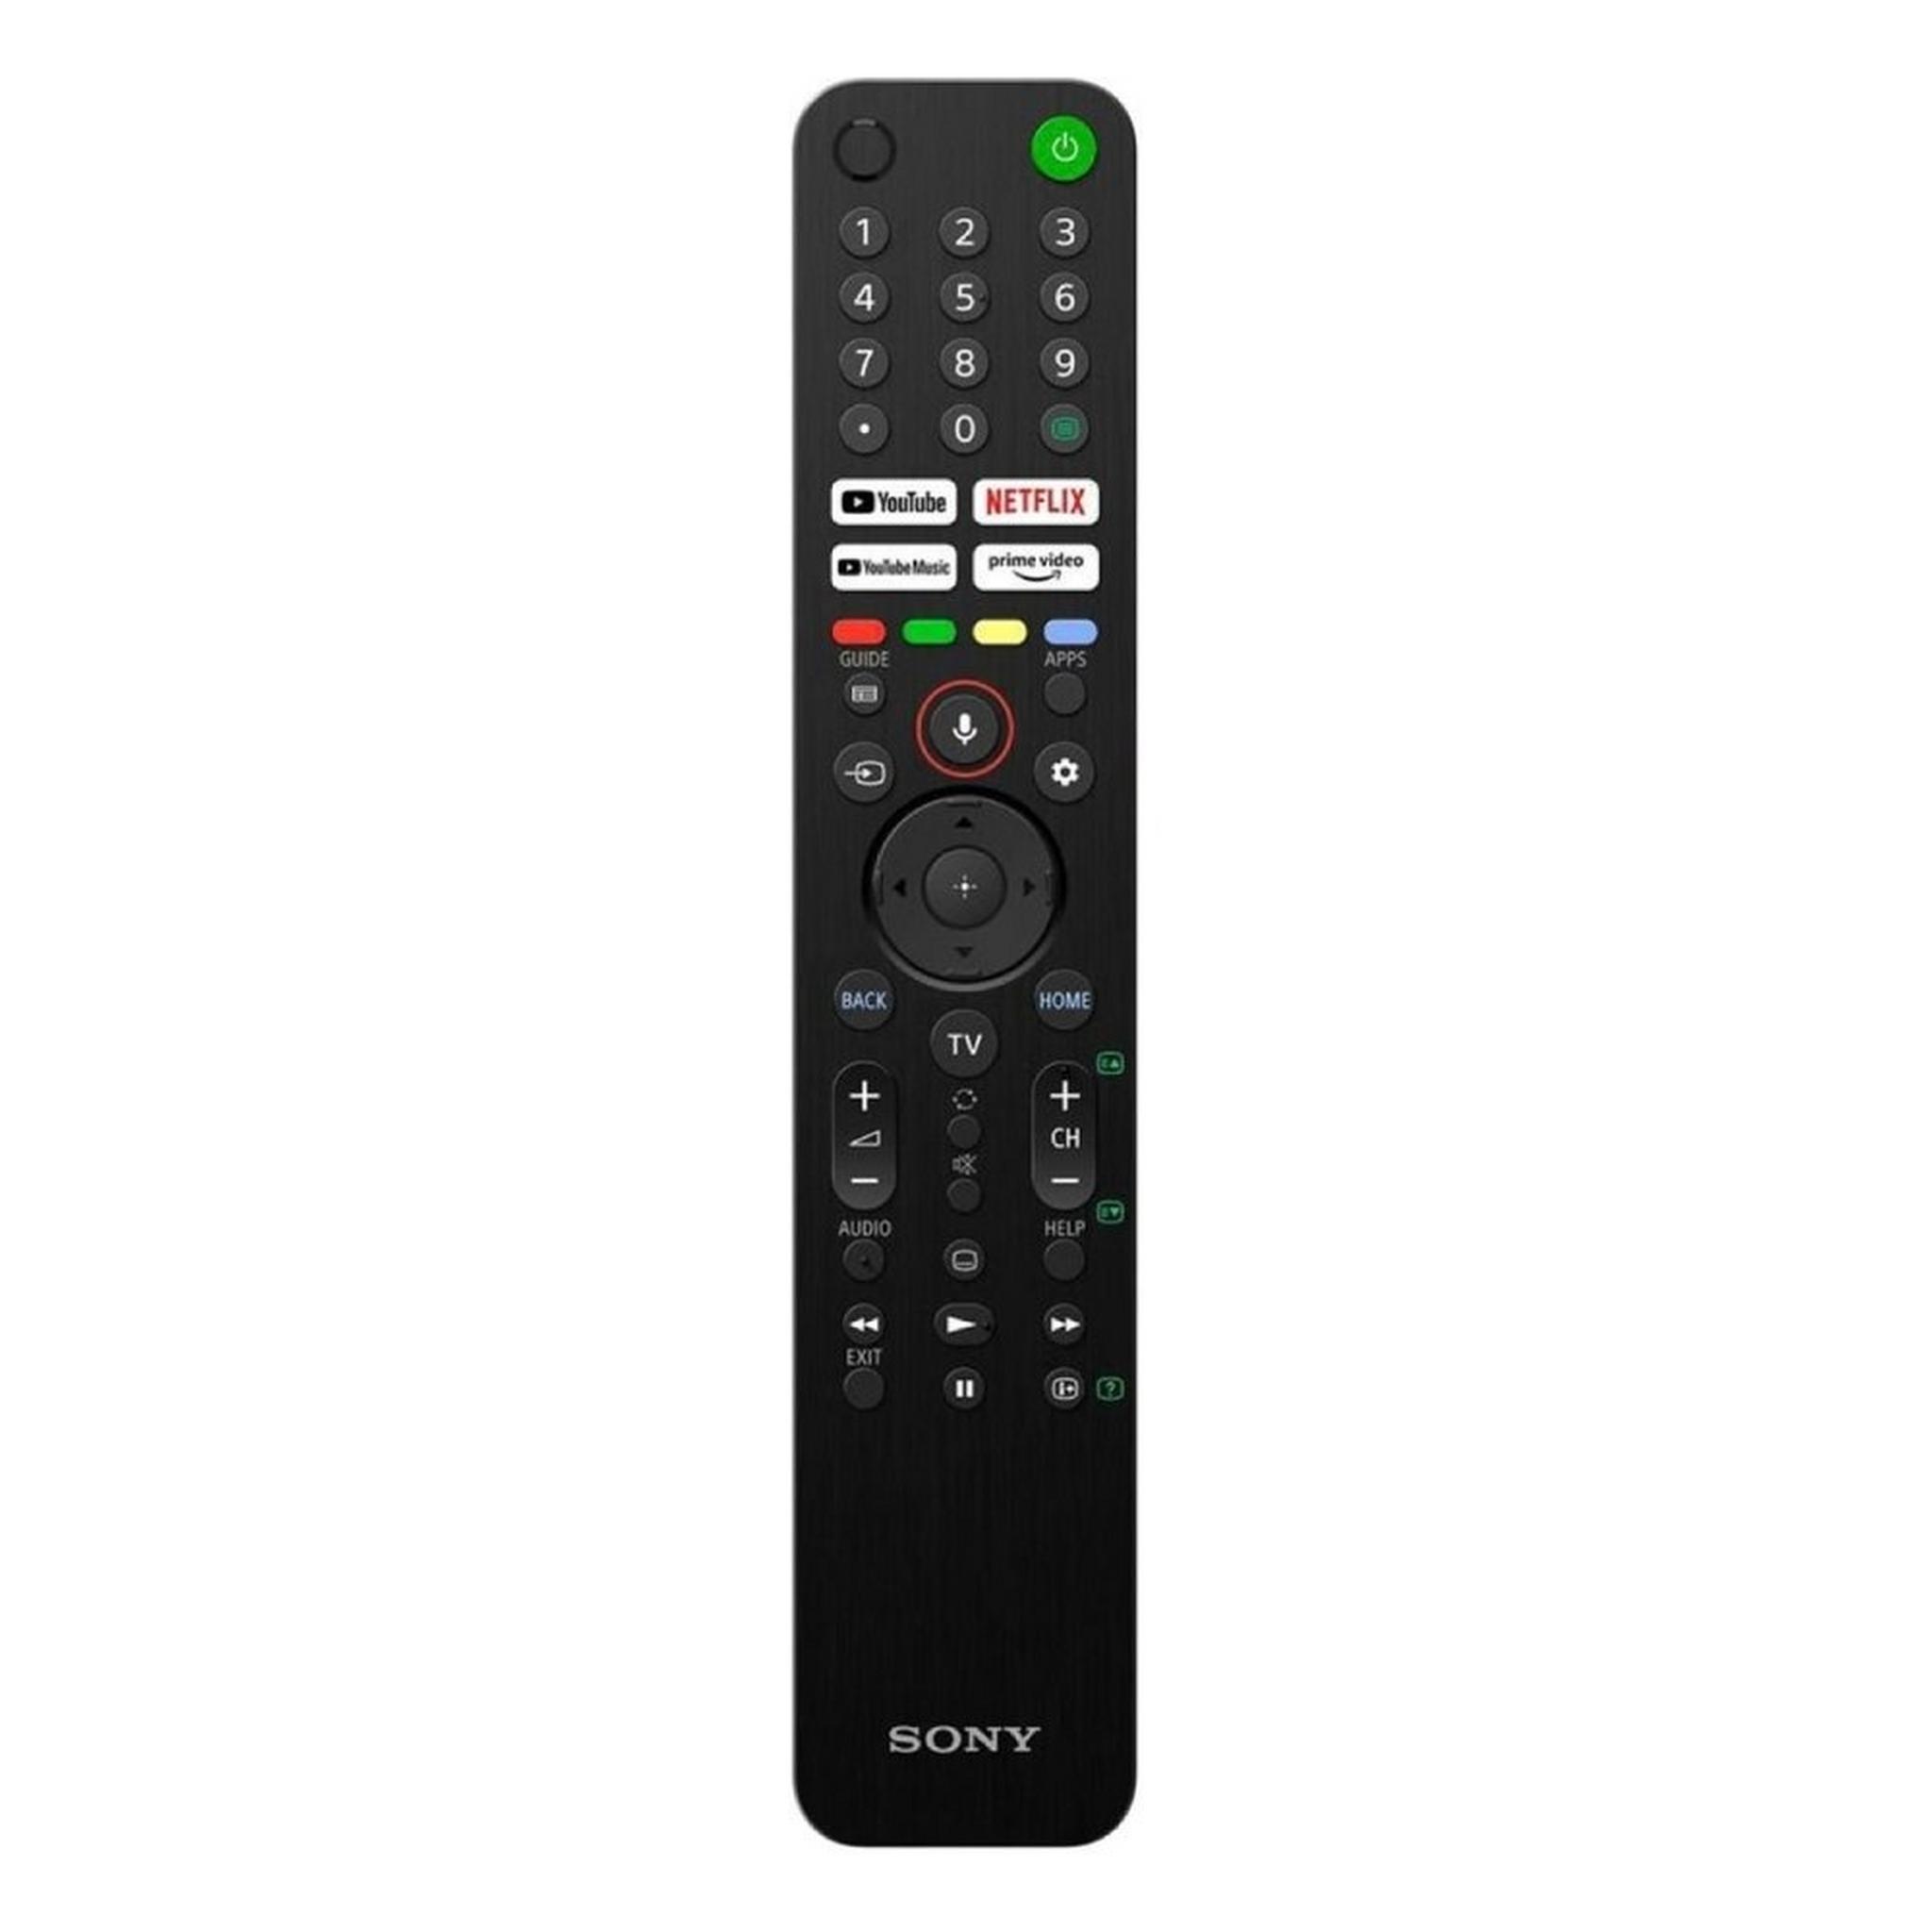 Sony Smart TV 65 inch Android LED 4K HDR KD-65X75K - Black